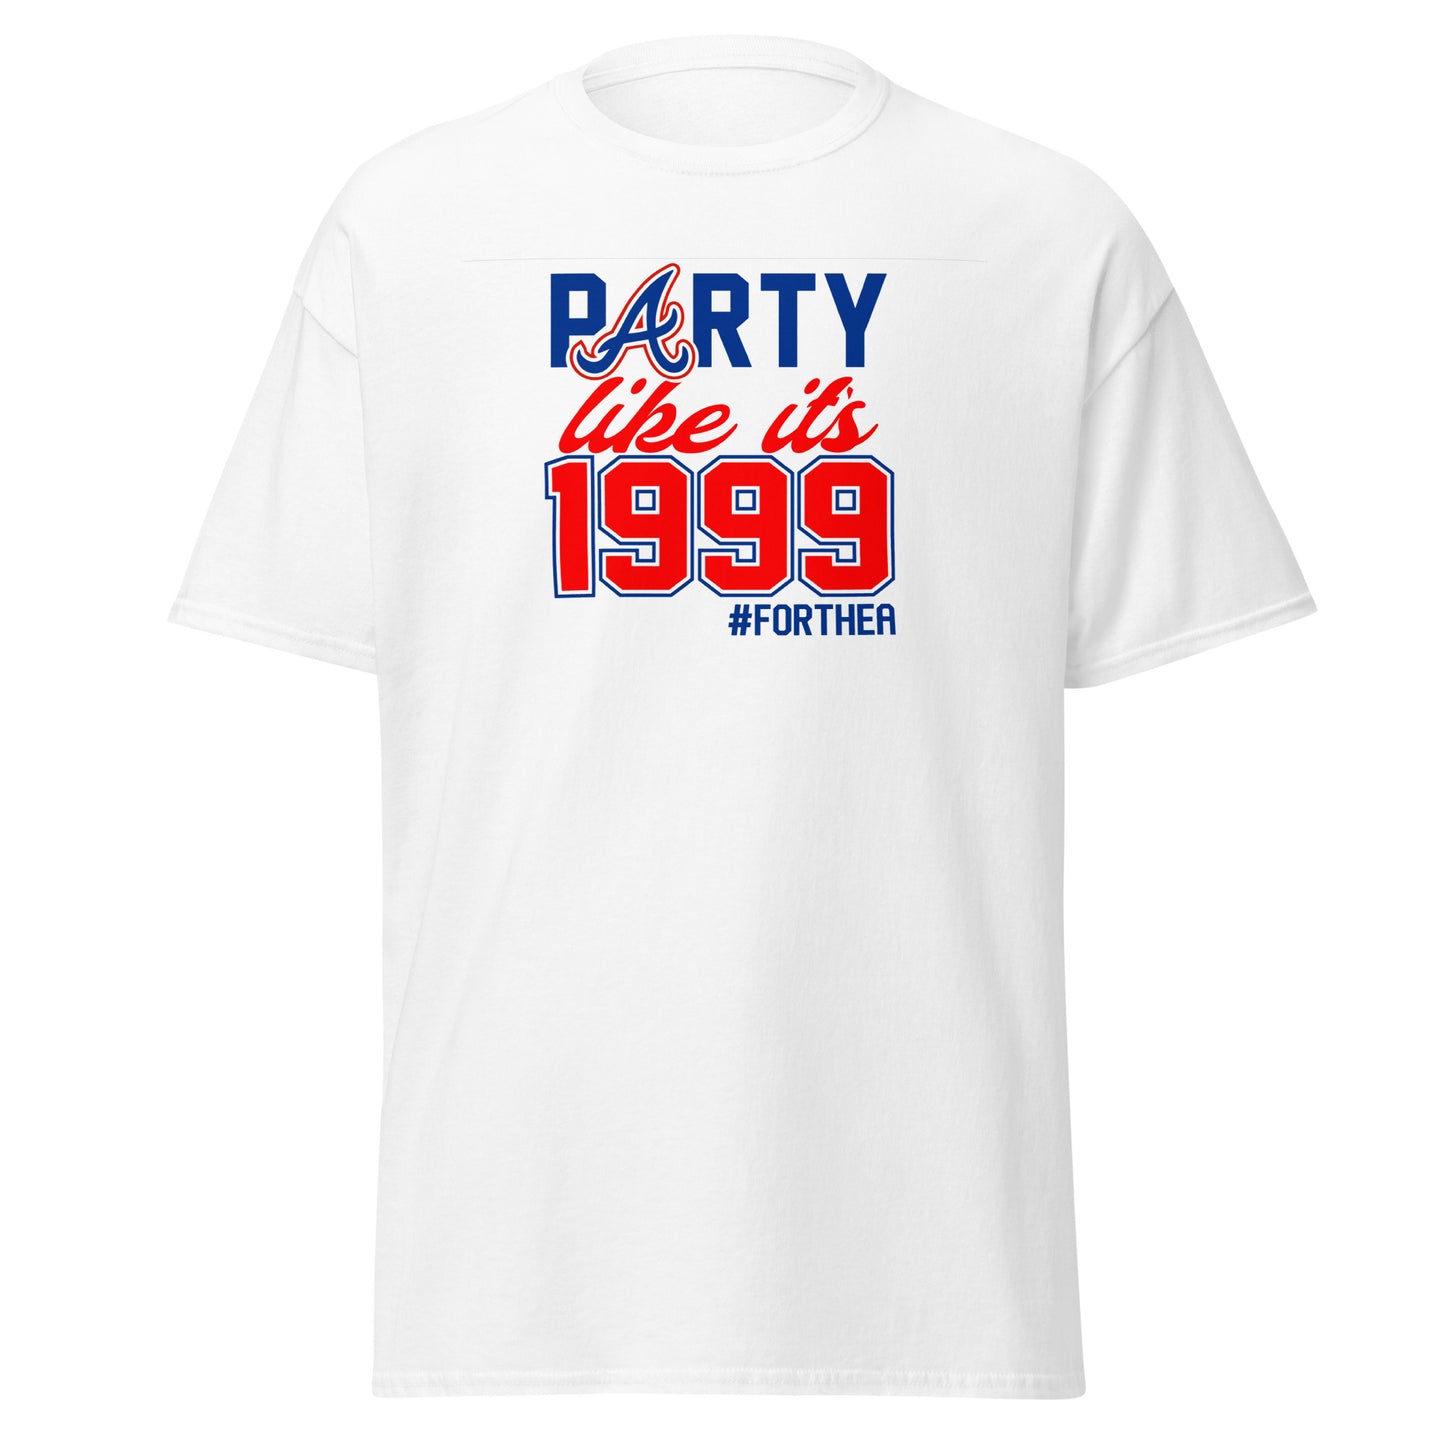 Party like its 1999